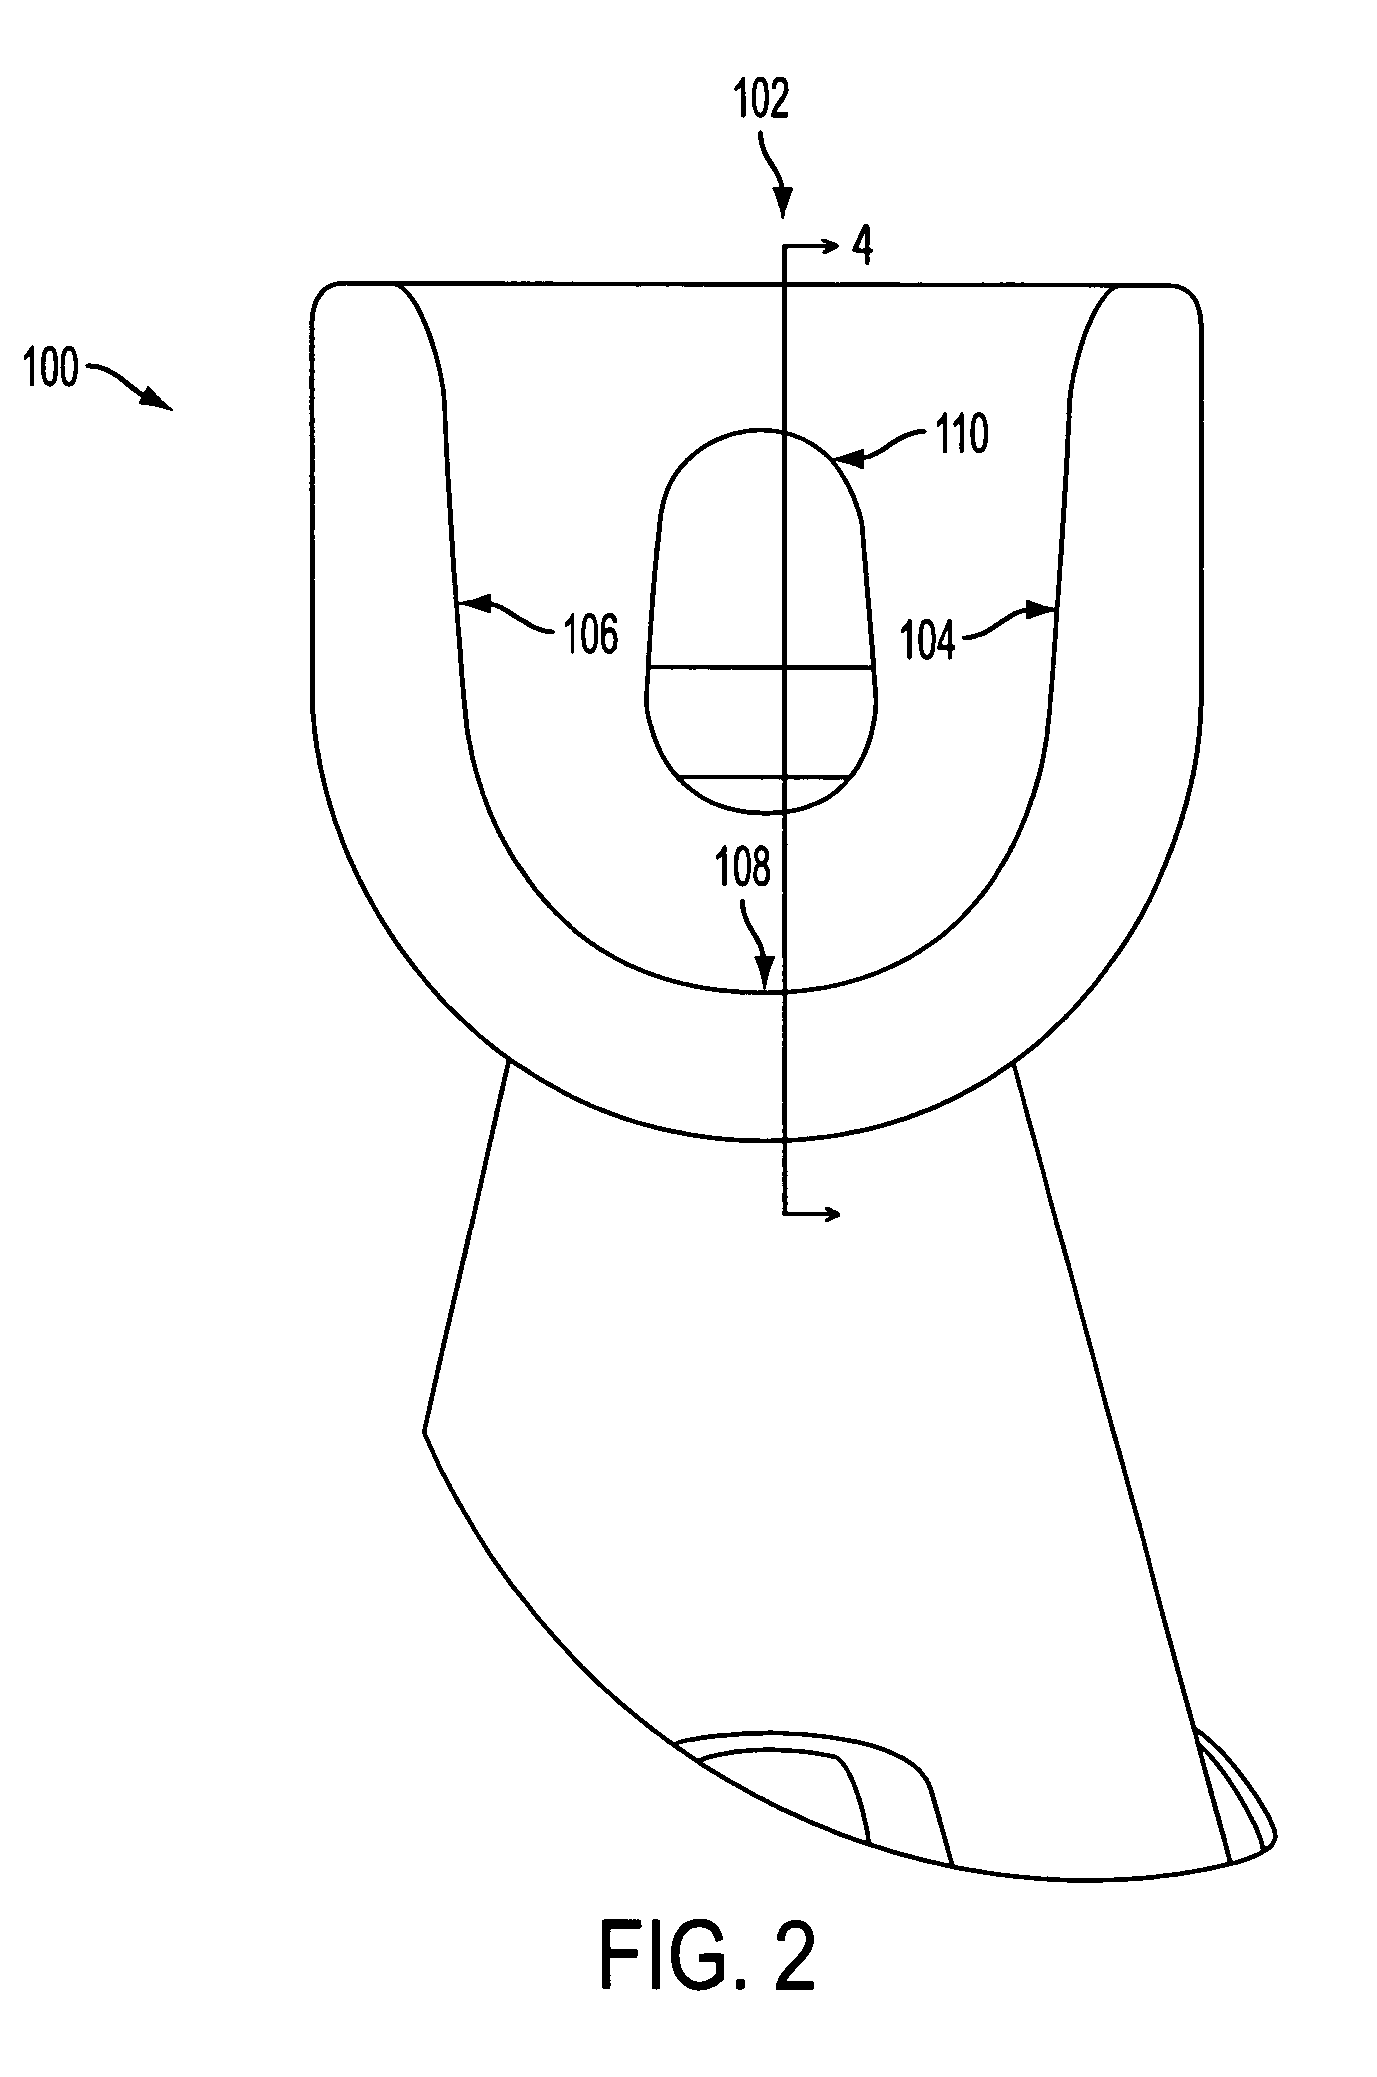 Surgical knife blade attachment and method for using same